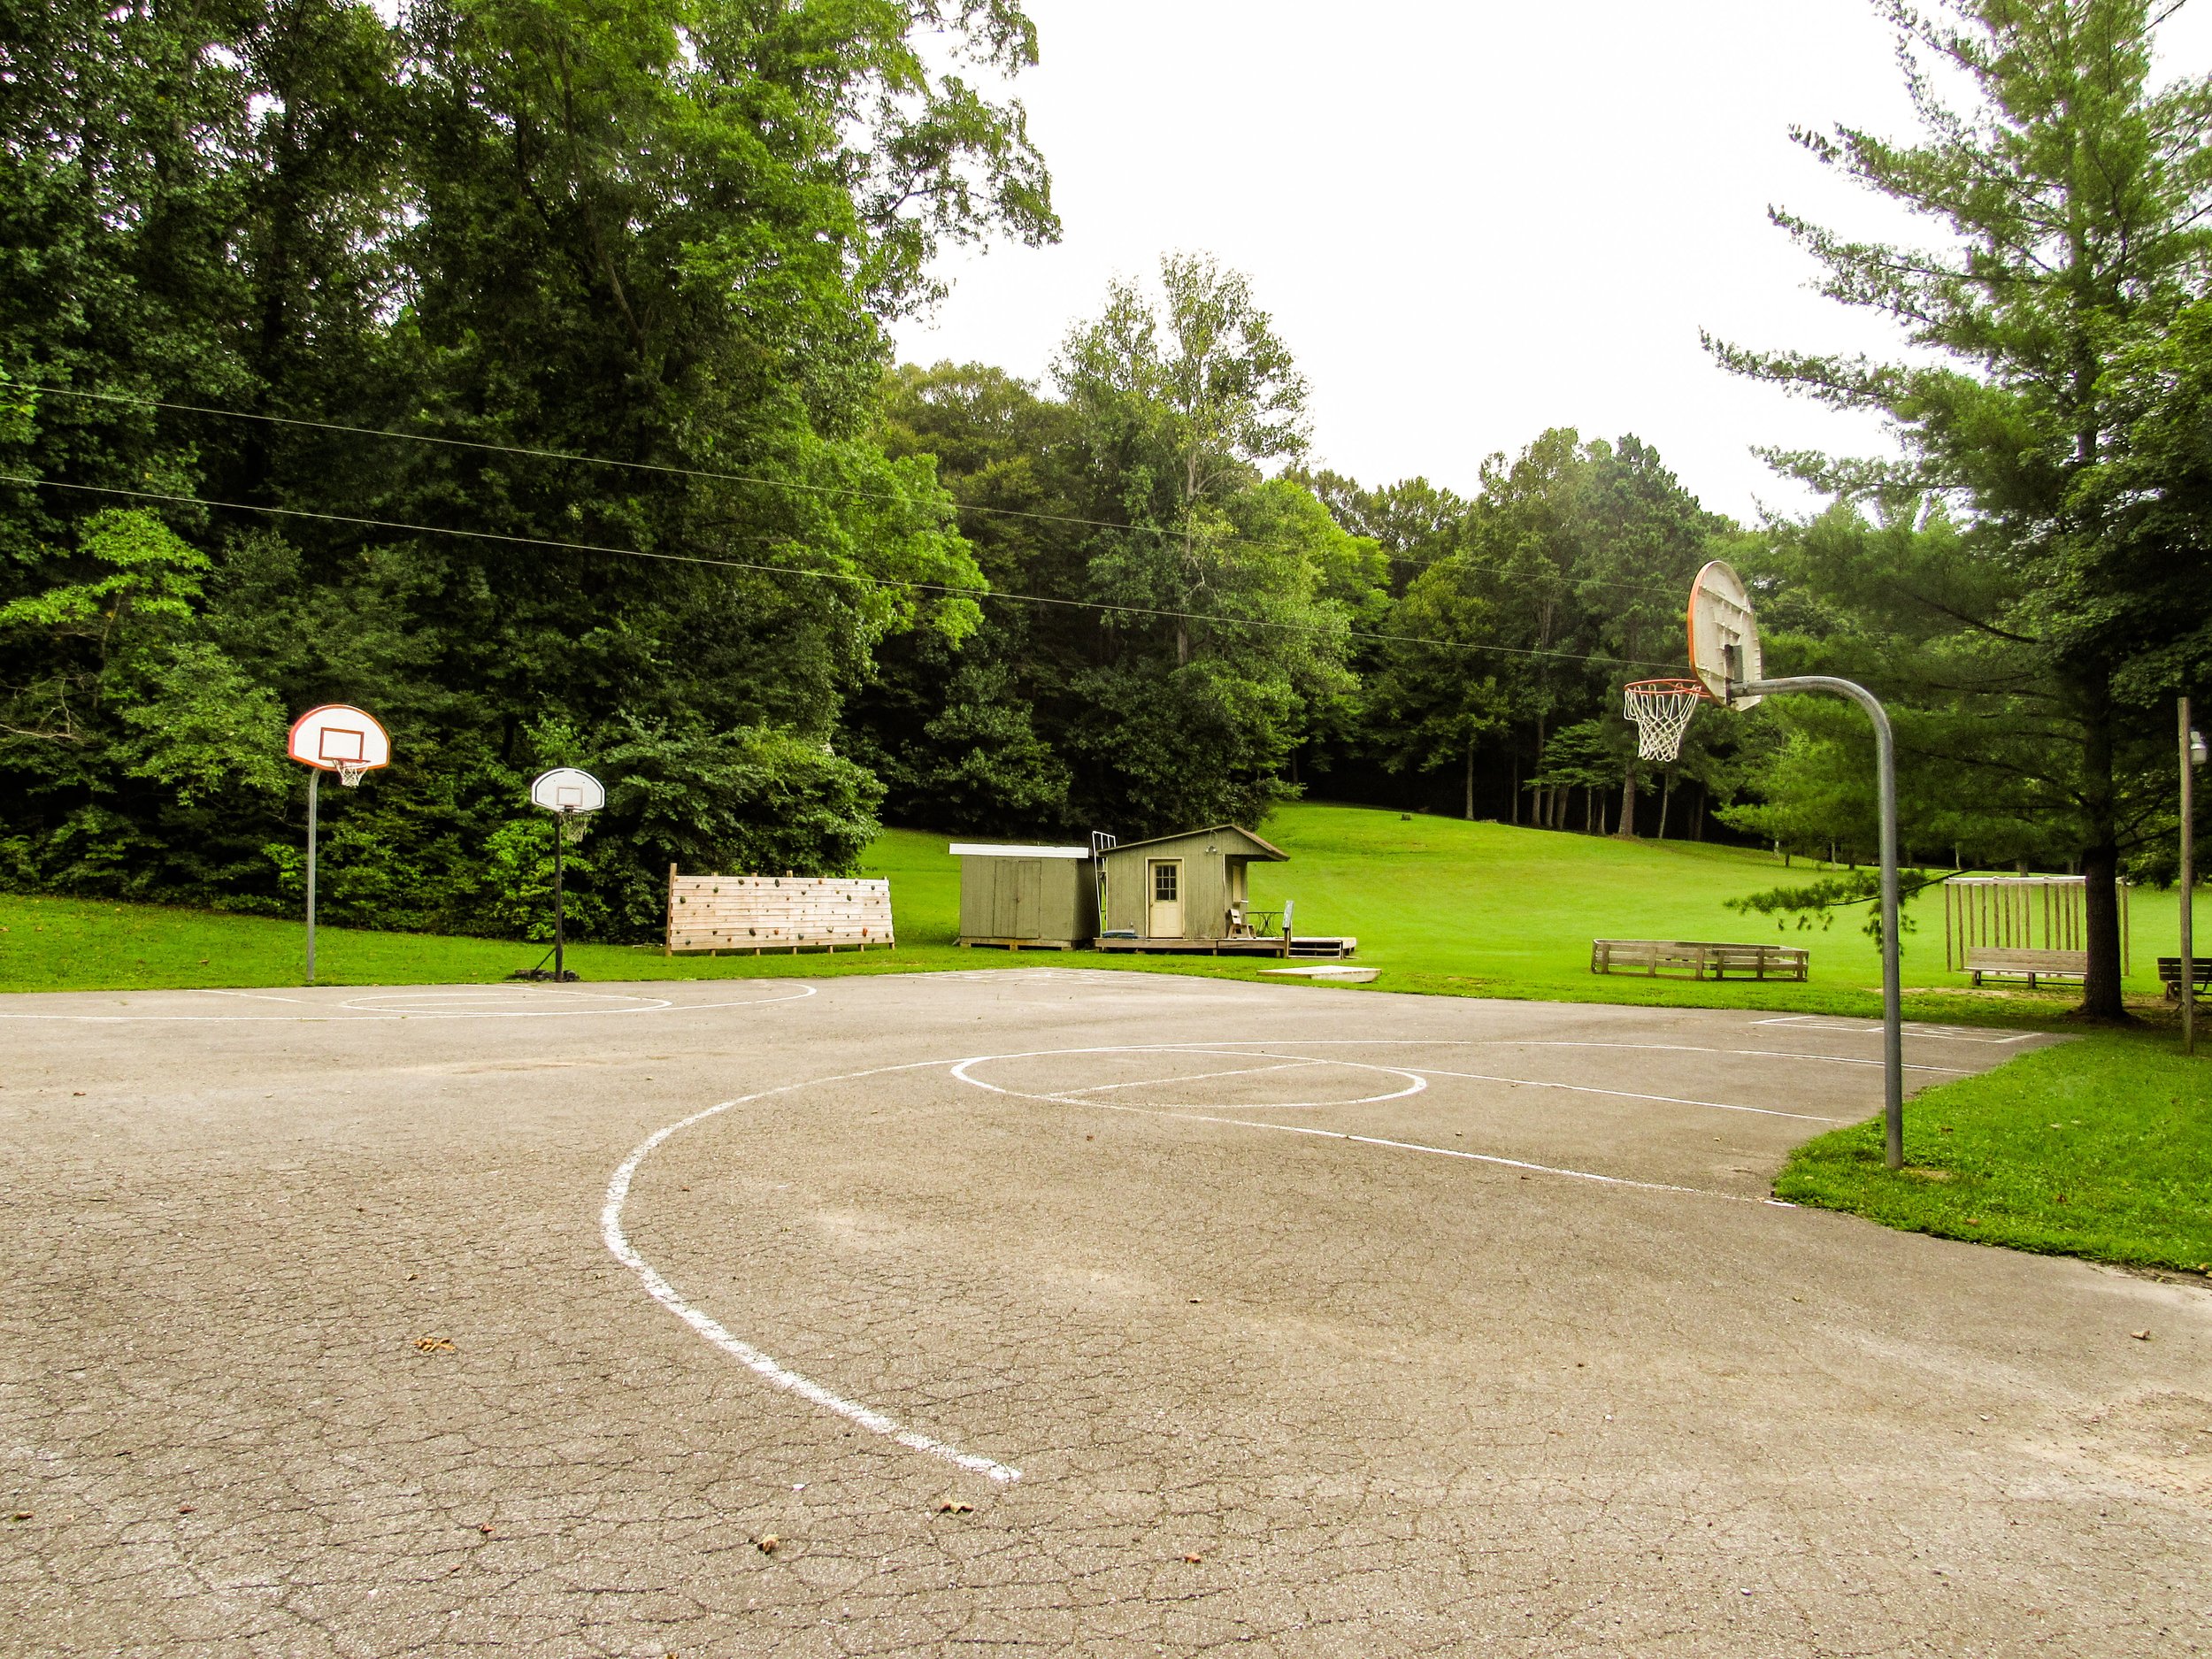 Basketball courts and games at the Canteen Field